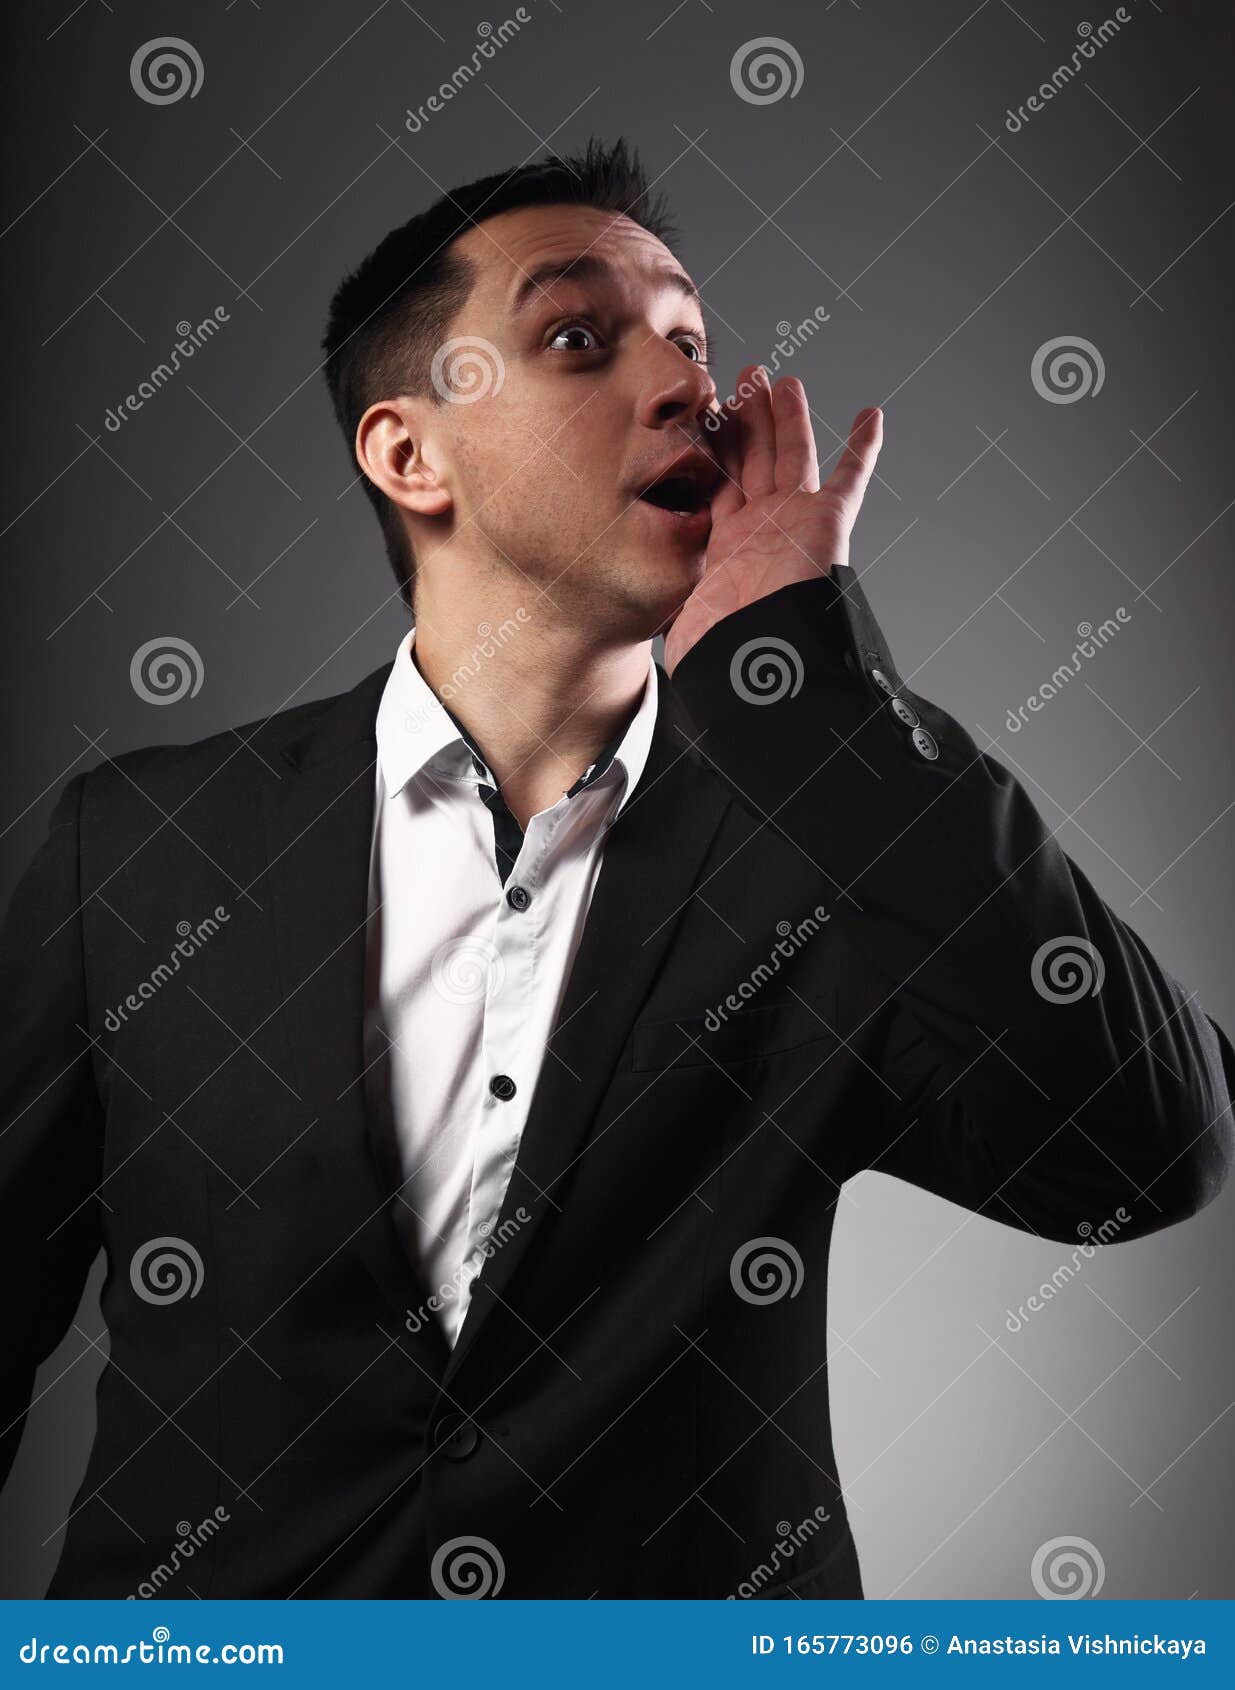 excited shouting young business man gesturing the hands loudspeaker sign in celebrating emotion with wide open mouth to agitate on